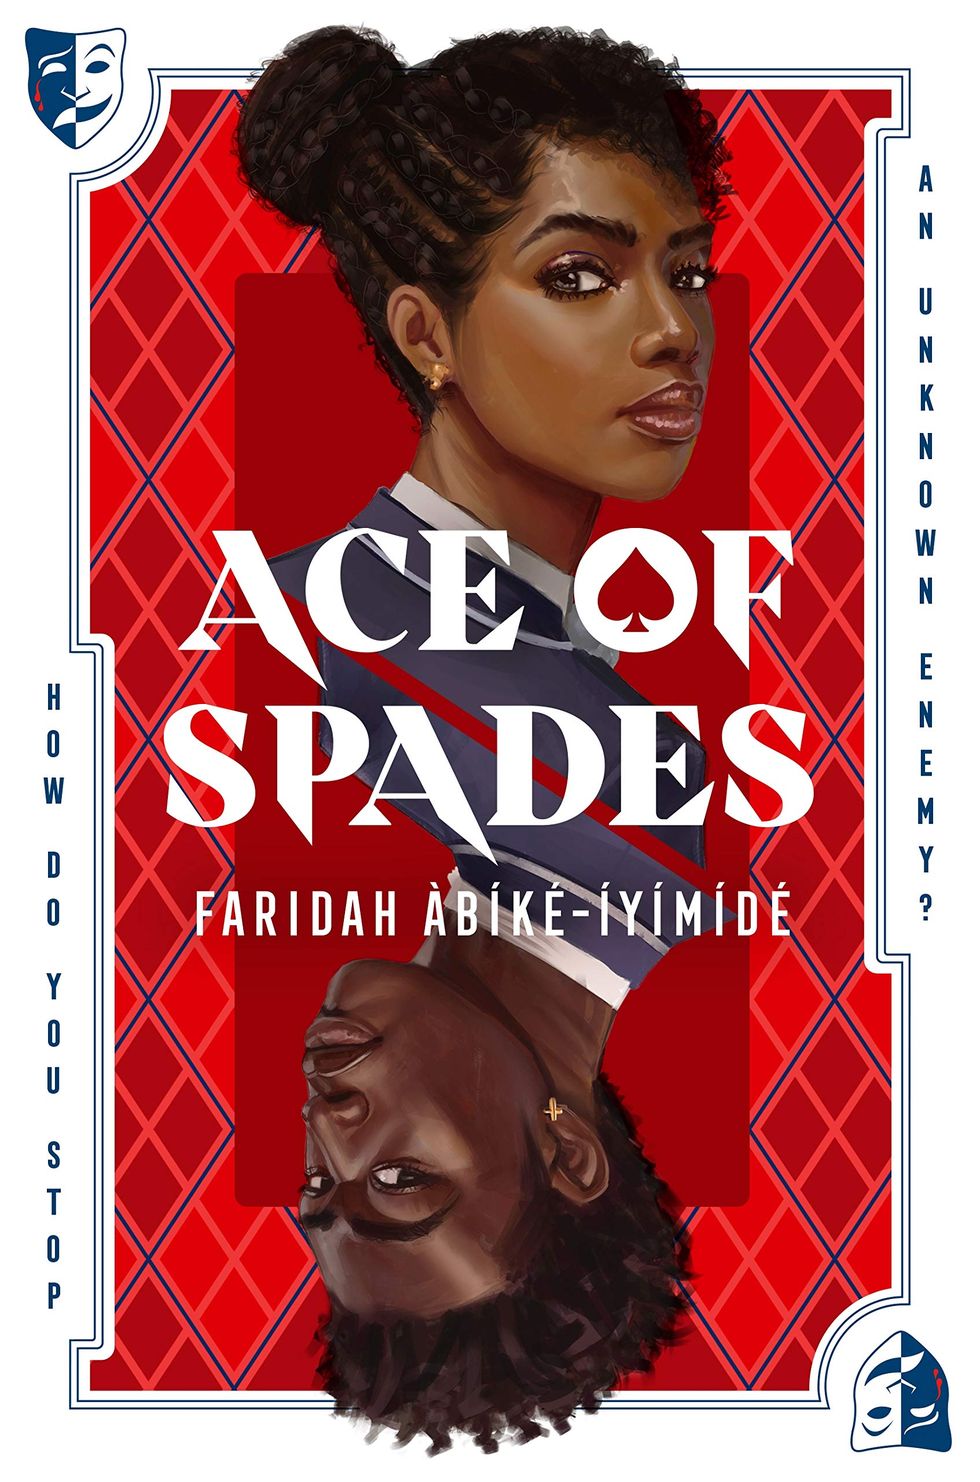 ace of spades' by faridah abíke iyimide cover featuring two black students offset from each other as if on a playing card with a red card like background